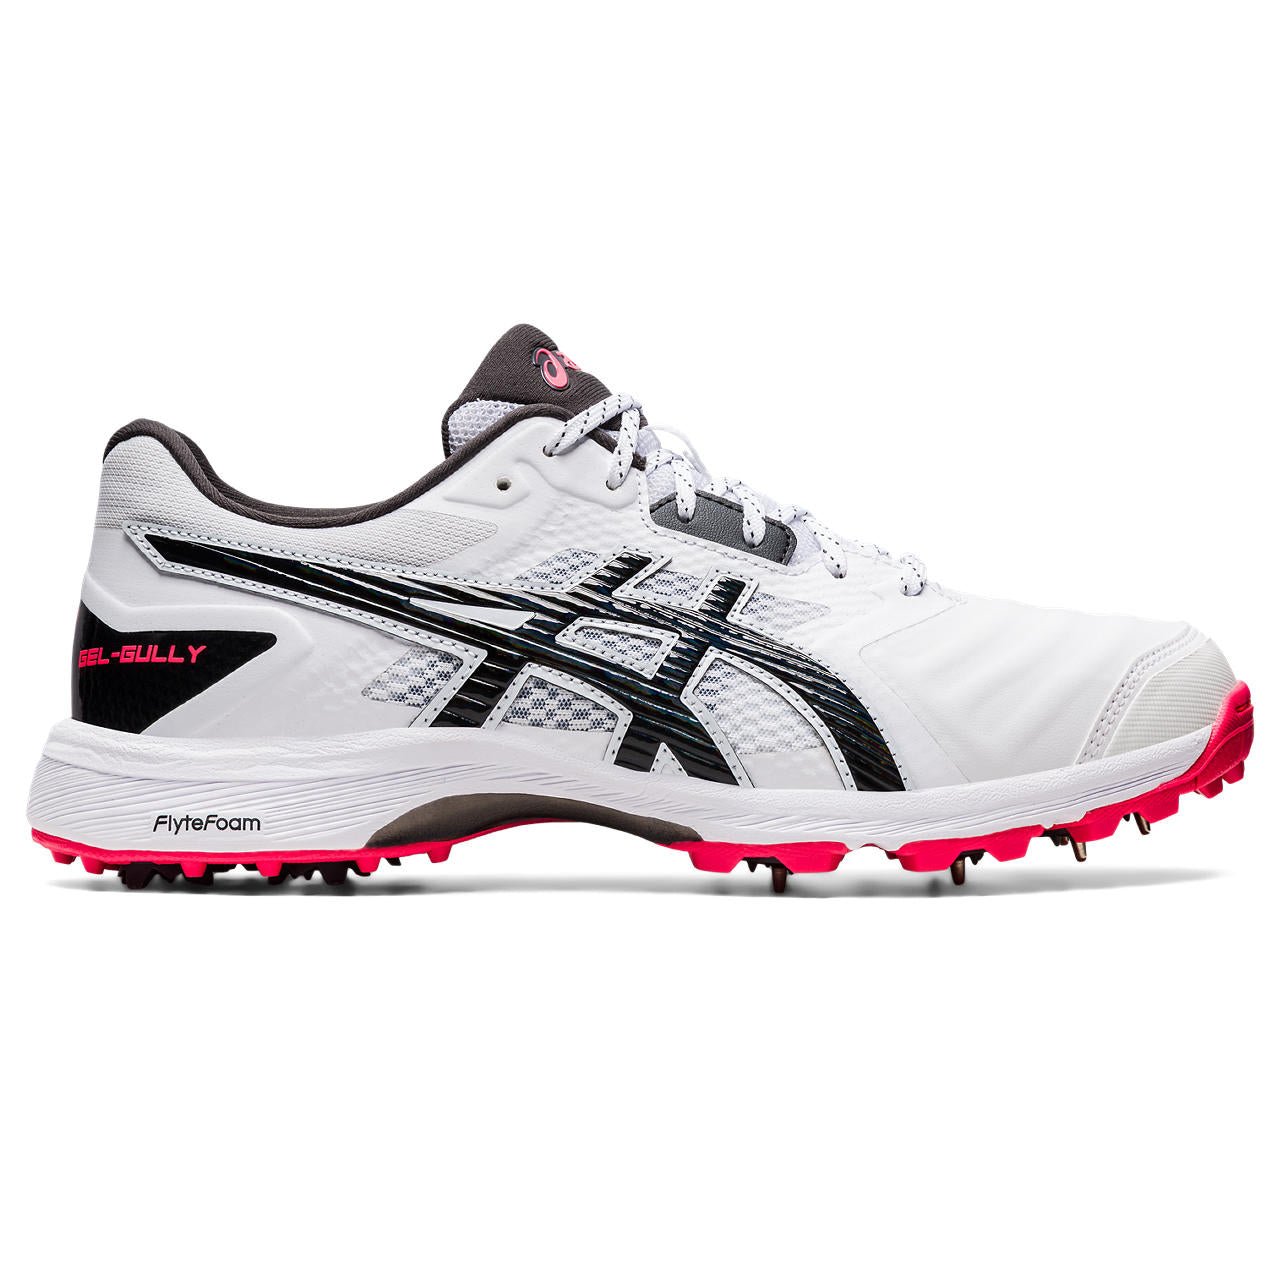 Asics Gel Gully 7 Cricket Spikes White/Red - The Cricket Warehouse